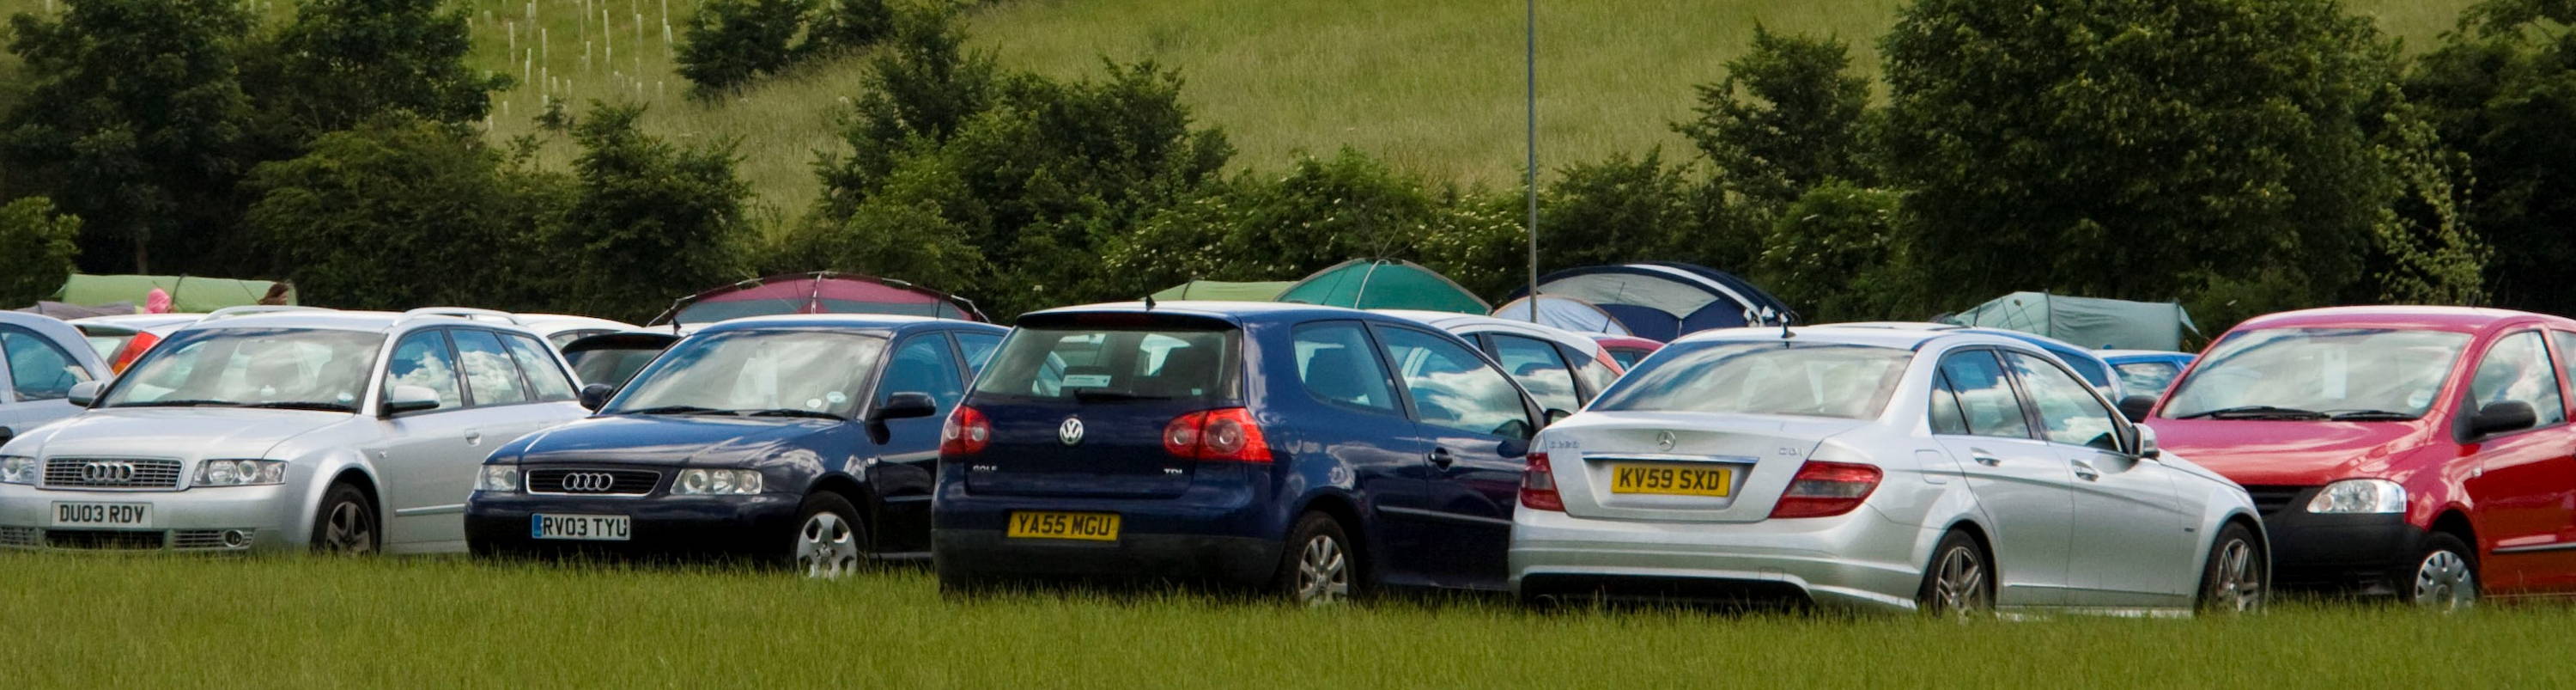 Visitors' parking on Temple Island Meadows during  Henley Royal Regatta